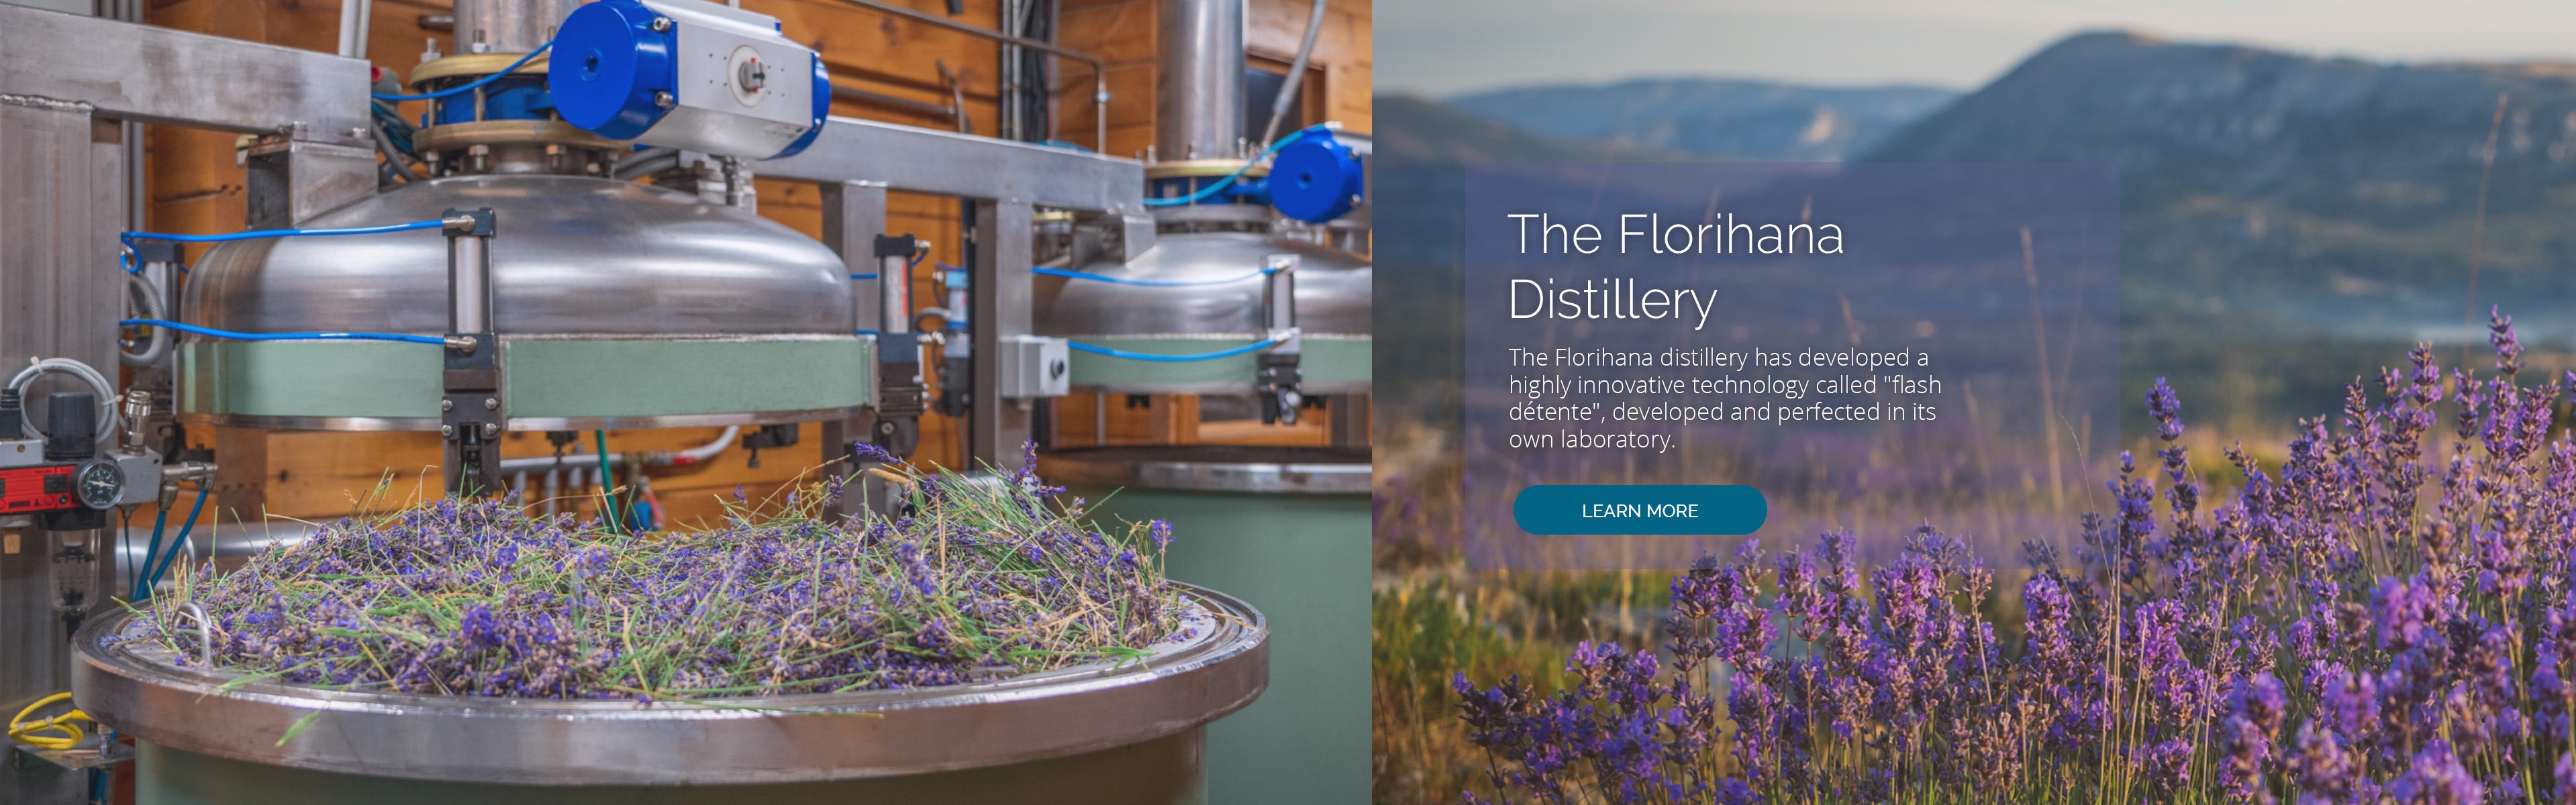 The Florihana distillery has developed a highly innovative technology called "flash détente", developed and perfected in its own laboratory. 